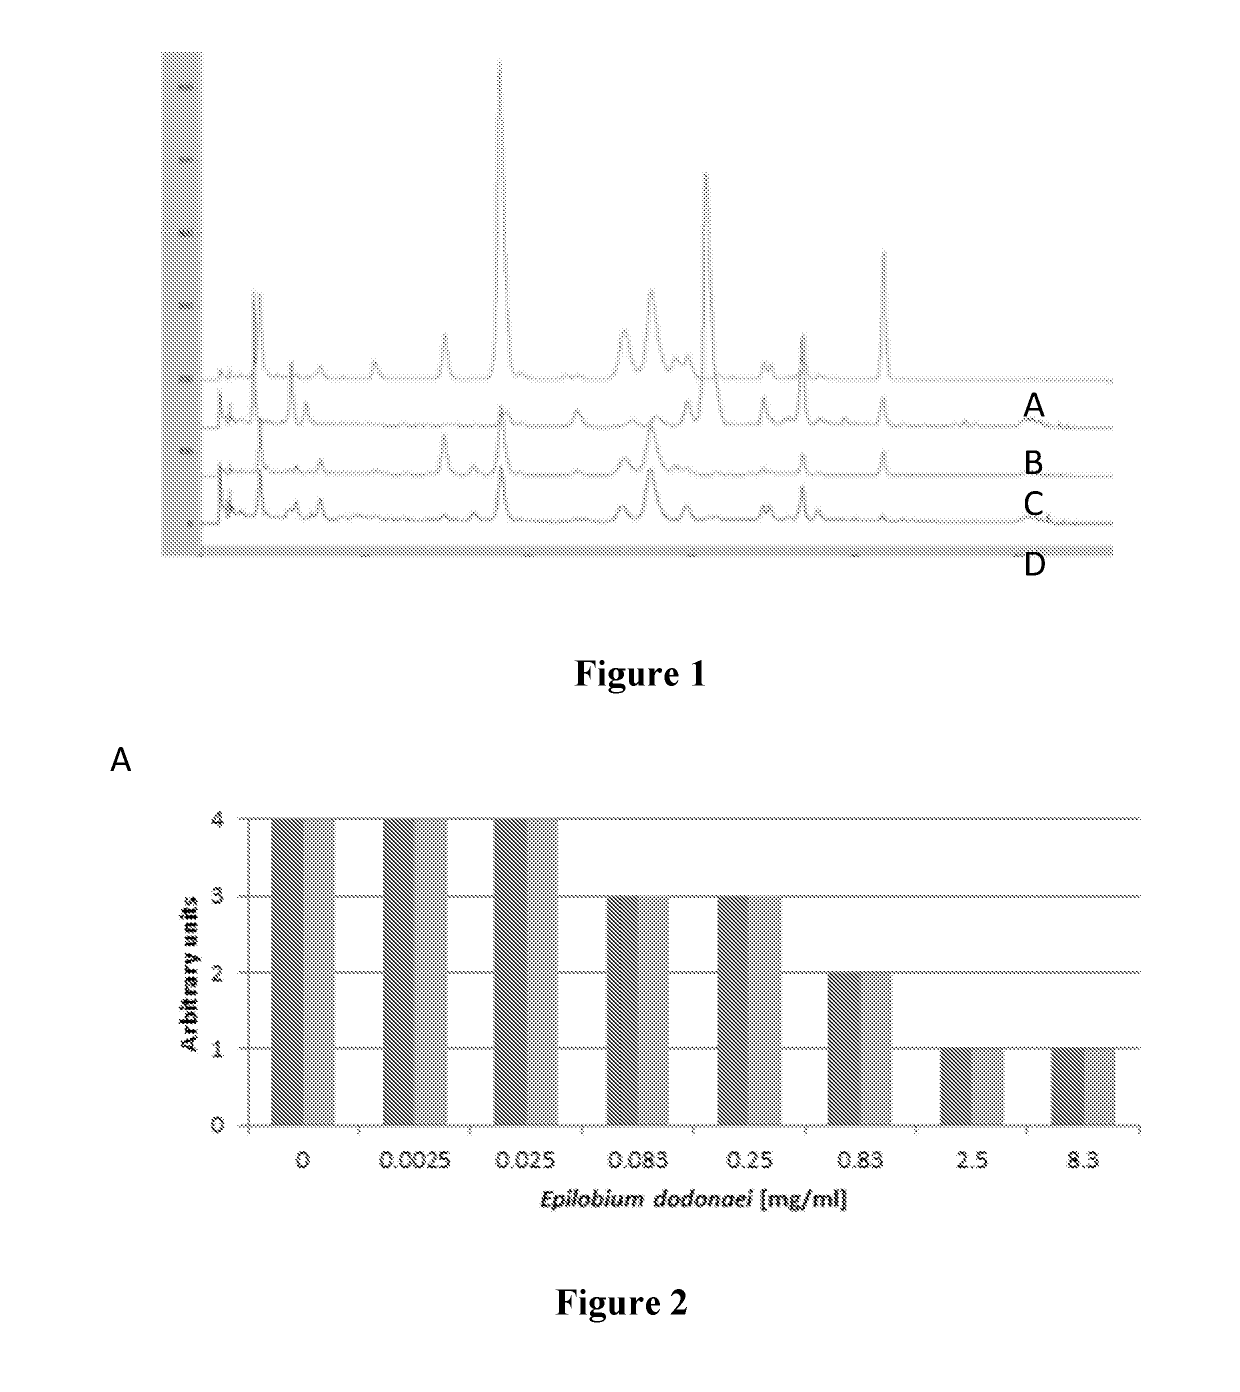 Anti-candida compositions and uses thereof